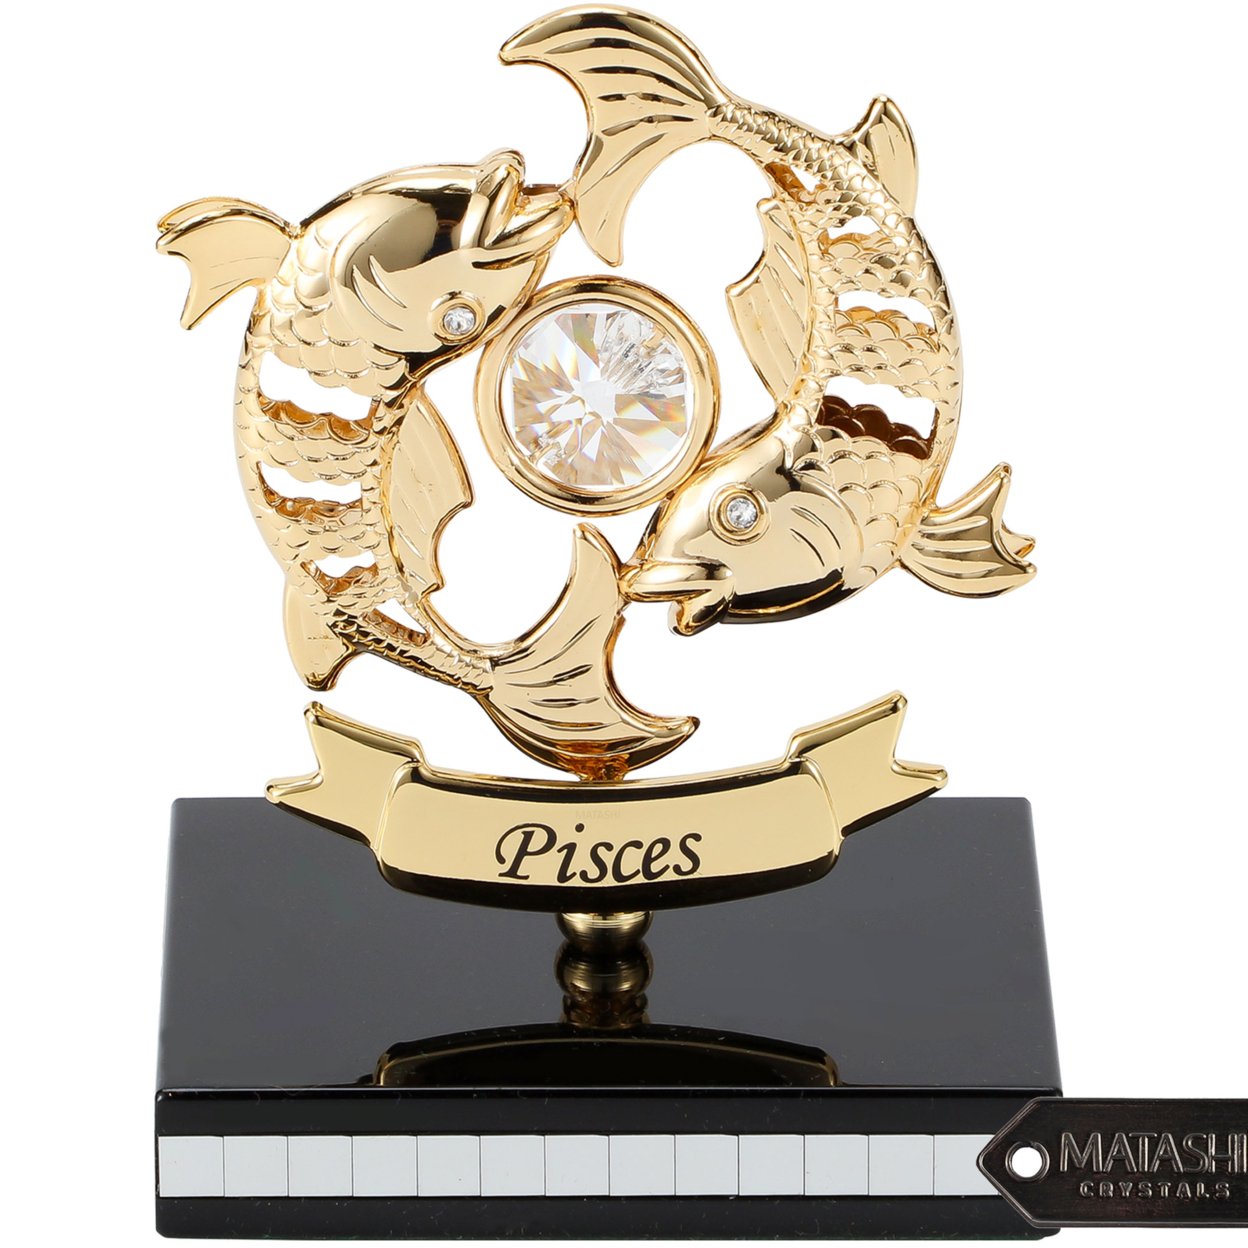 Matashi 24K Gold Plated Zodiac Astrological Sign Pisces Figurine Statuette On Stand Studded With Crystals Gift For Mom Girlfriend Wife Dad